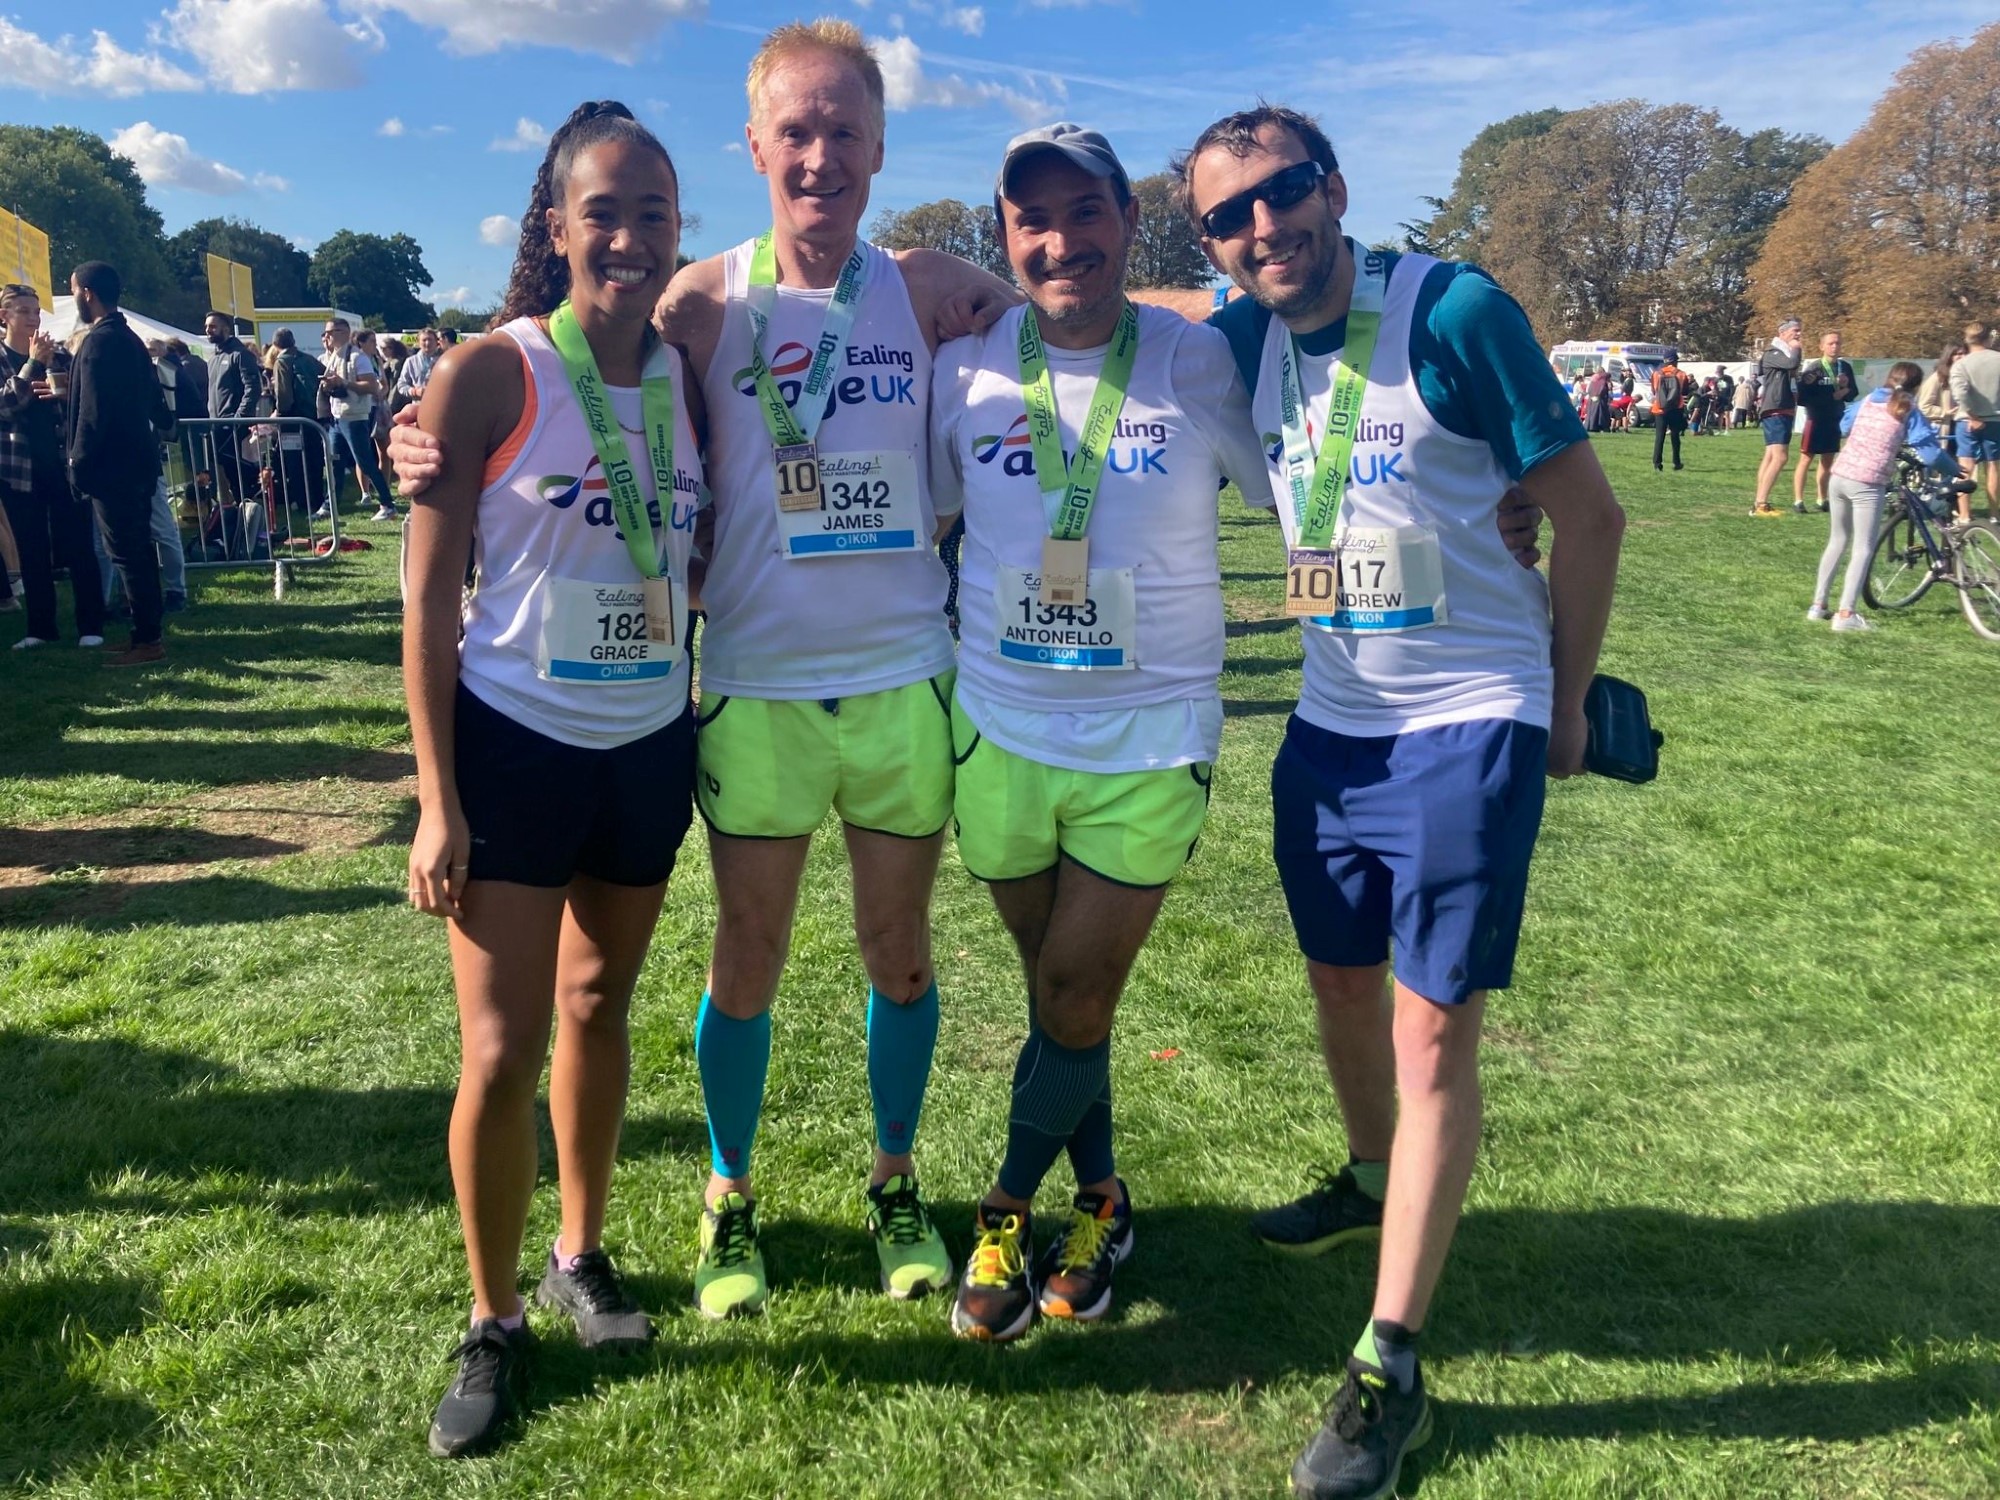 Four Age UK Ealing runners – Grace, James, Antonello and Andrew